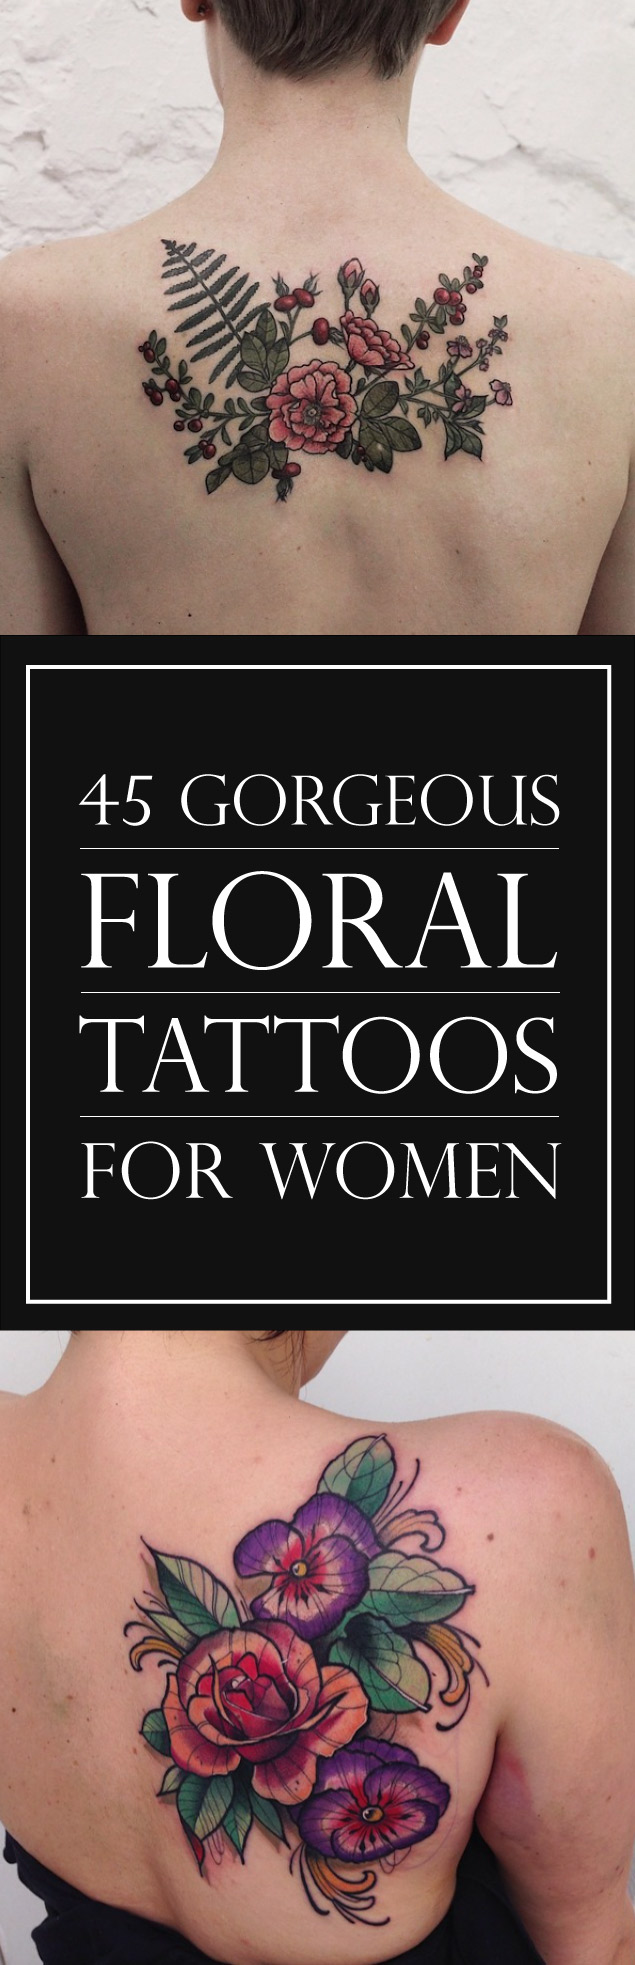 45 Gorgeous Floral Tattoos for Women | TattooBlend